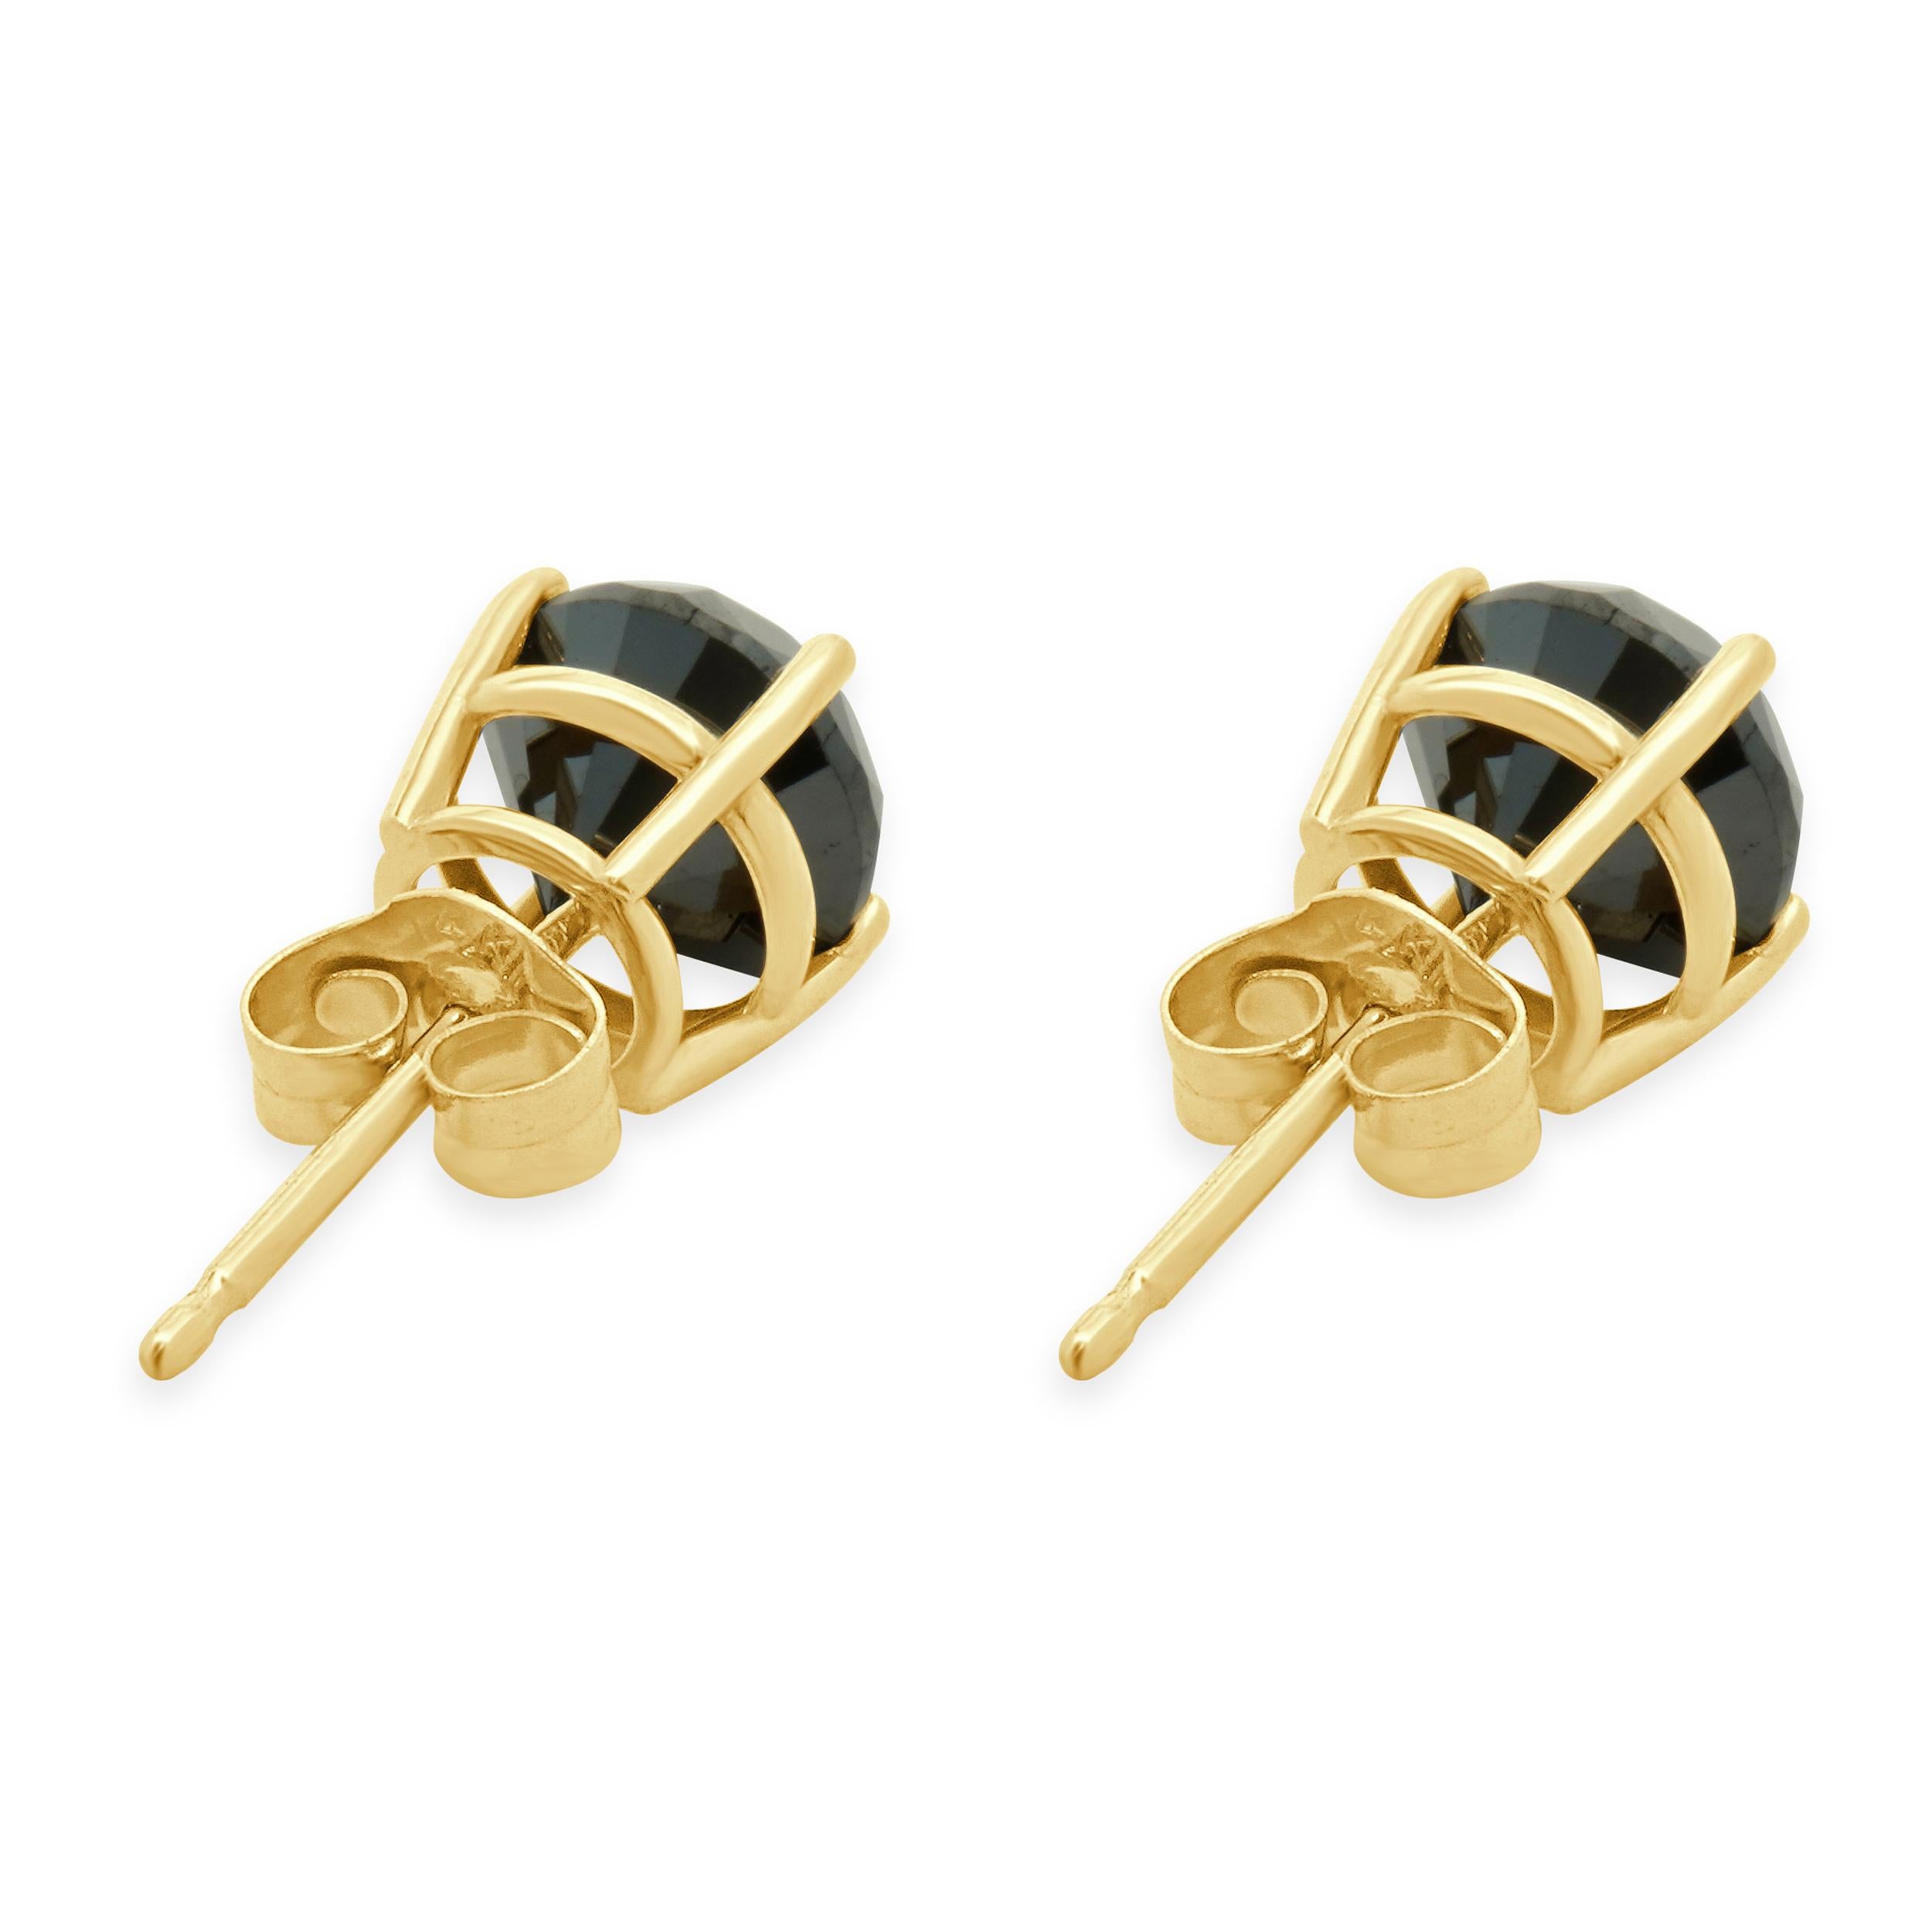 Material: 14K yellow gold
Diamonds: 2 round brilliant cut = 1.55cttw
Color: Black
Clarity: SI2
Dimensions: earrings measure approximately 6.20mm in diameter
Fastenings: friction backs
Weight: 1.24 grams
